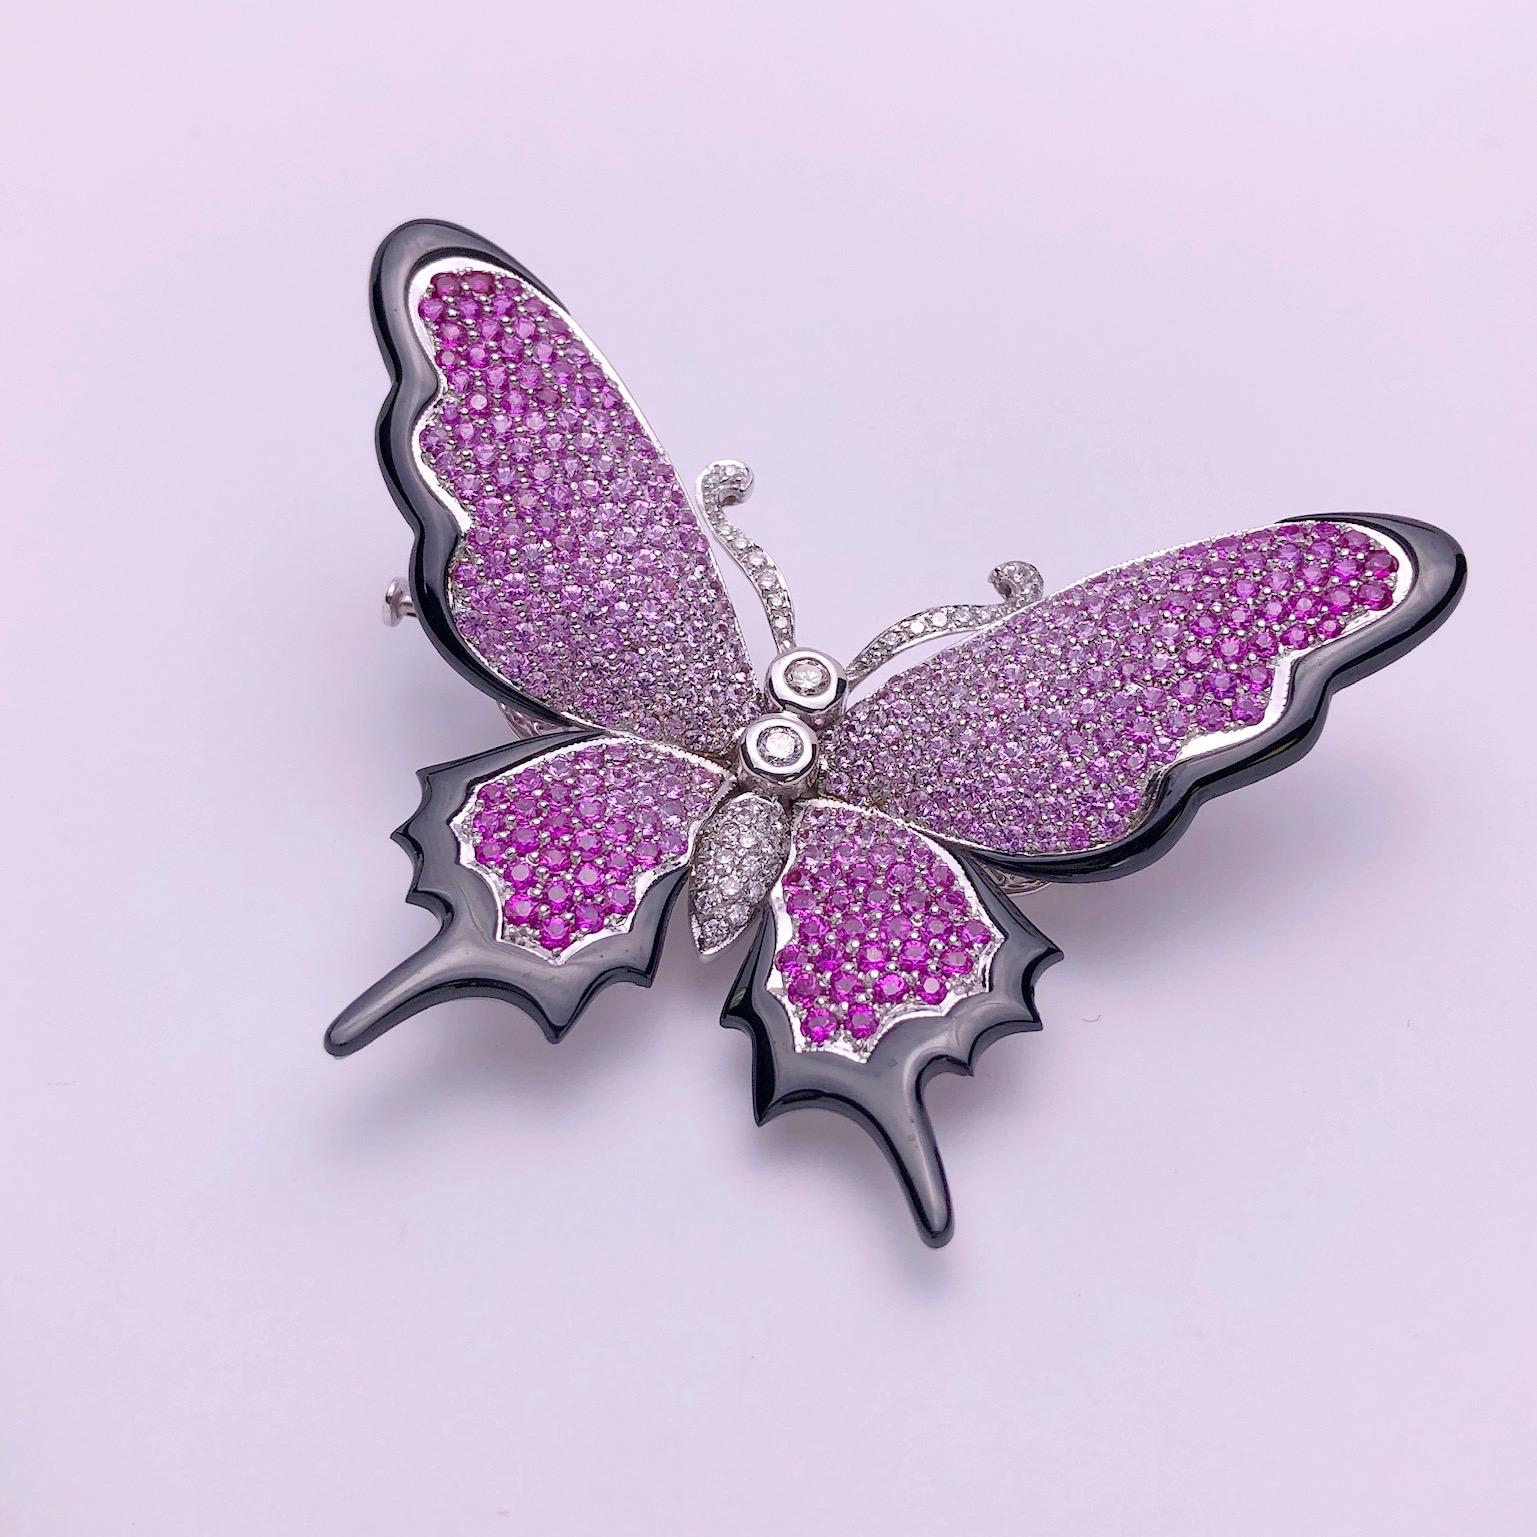 Contemporary Stenzhorn 18KT WG, Black Onyx, 10.30Ct.Pink Sapphire & Diamond Butterfly Brooch For Sale